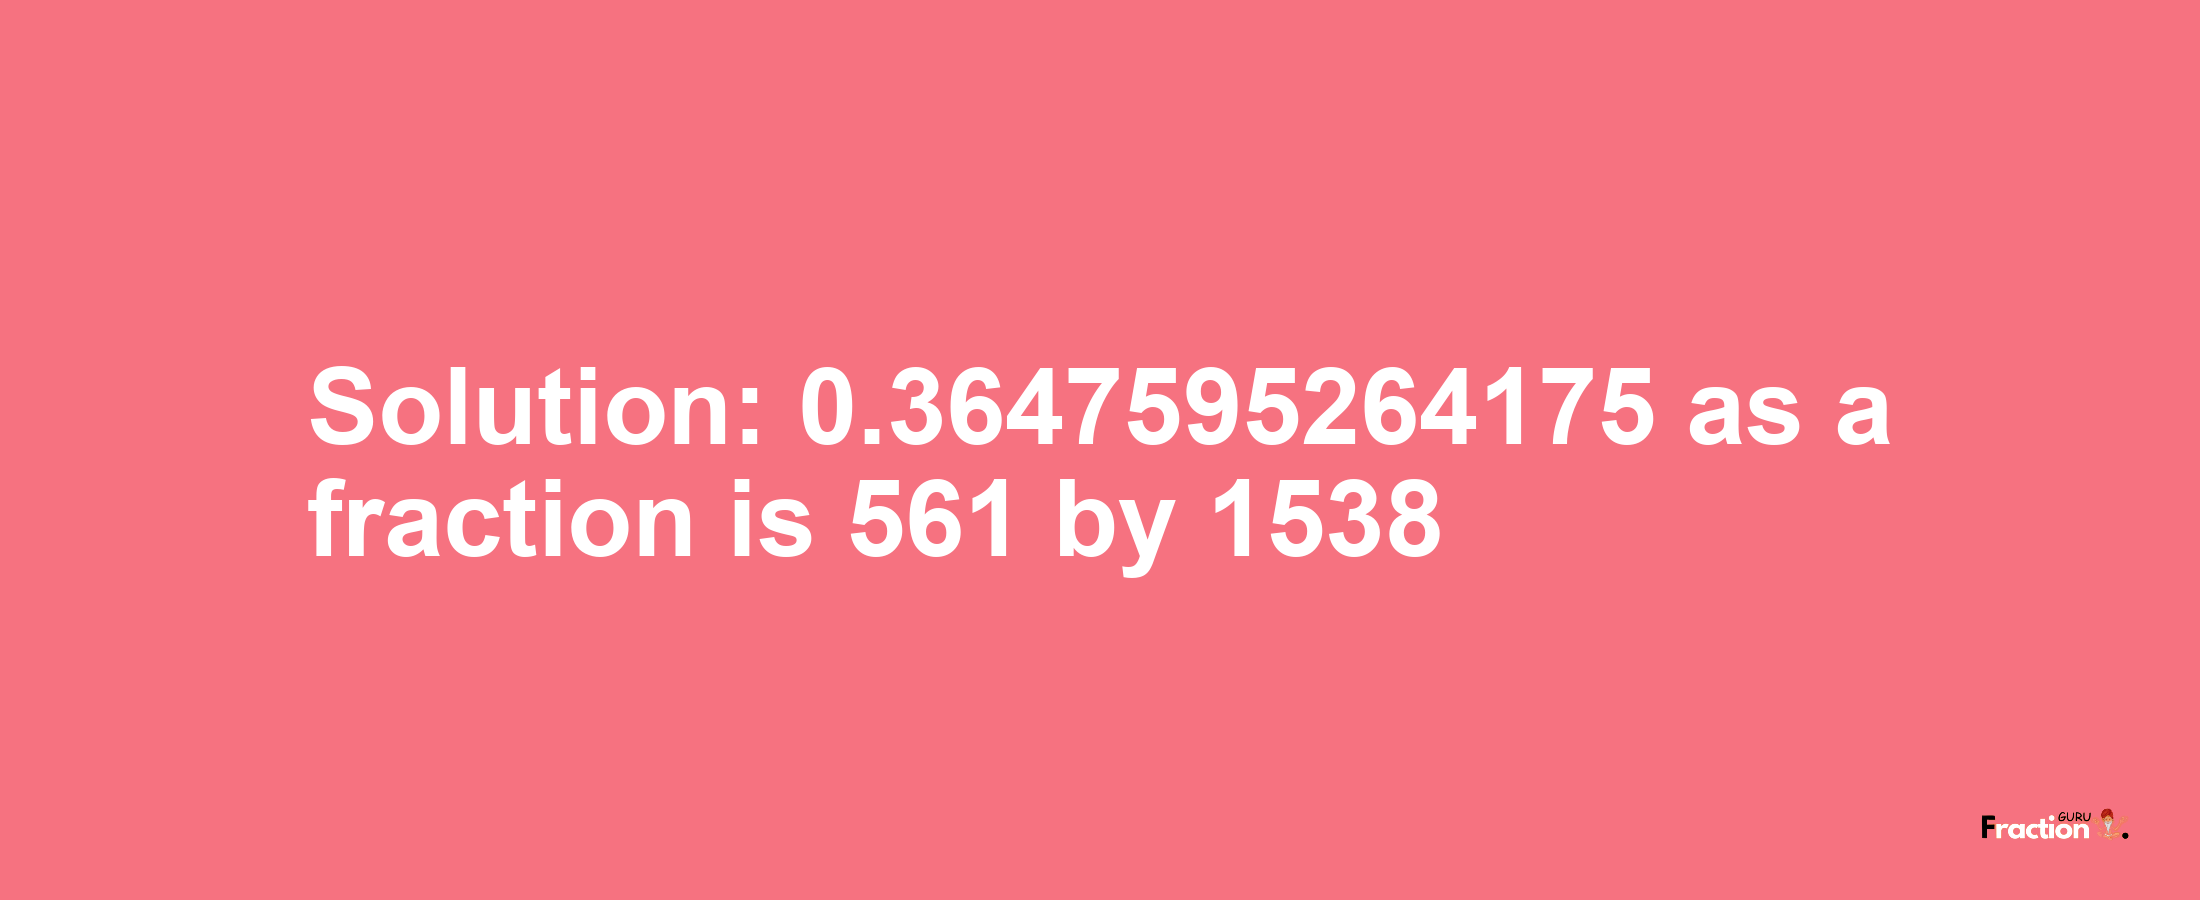 Solution:0.3647595264175 as a fraction is 561/1538